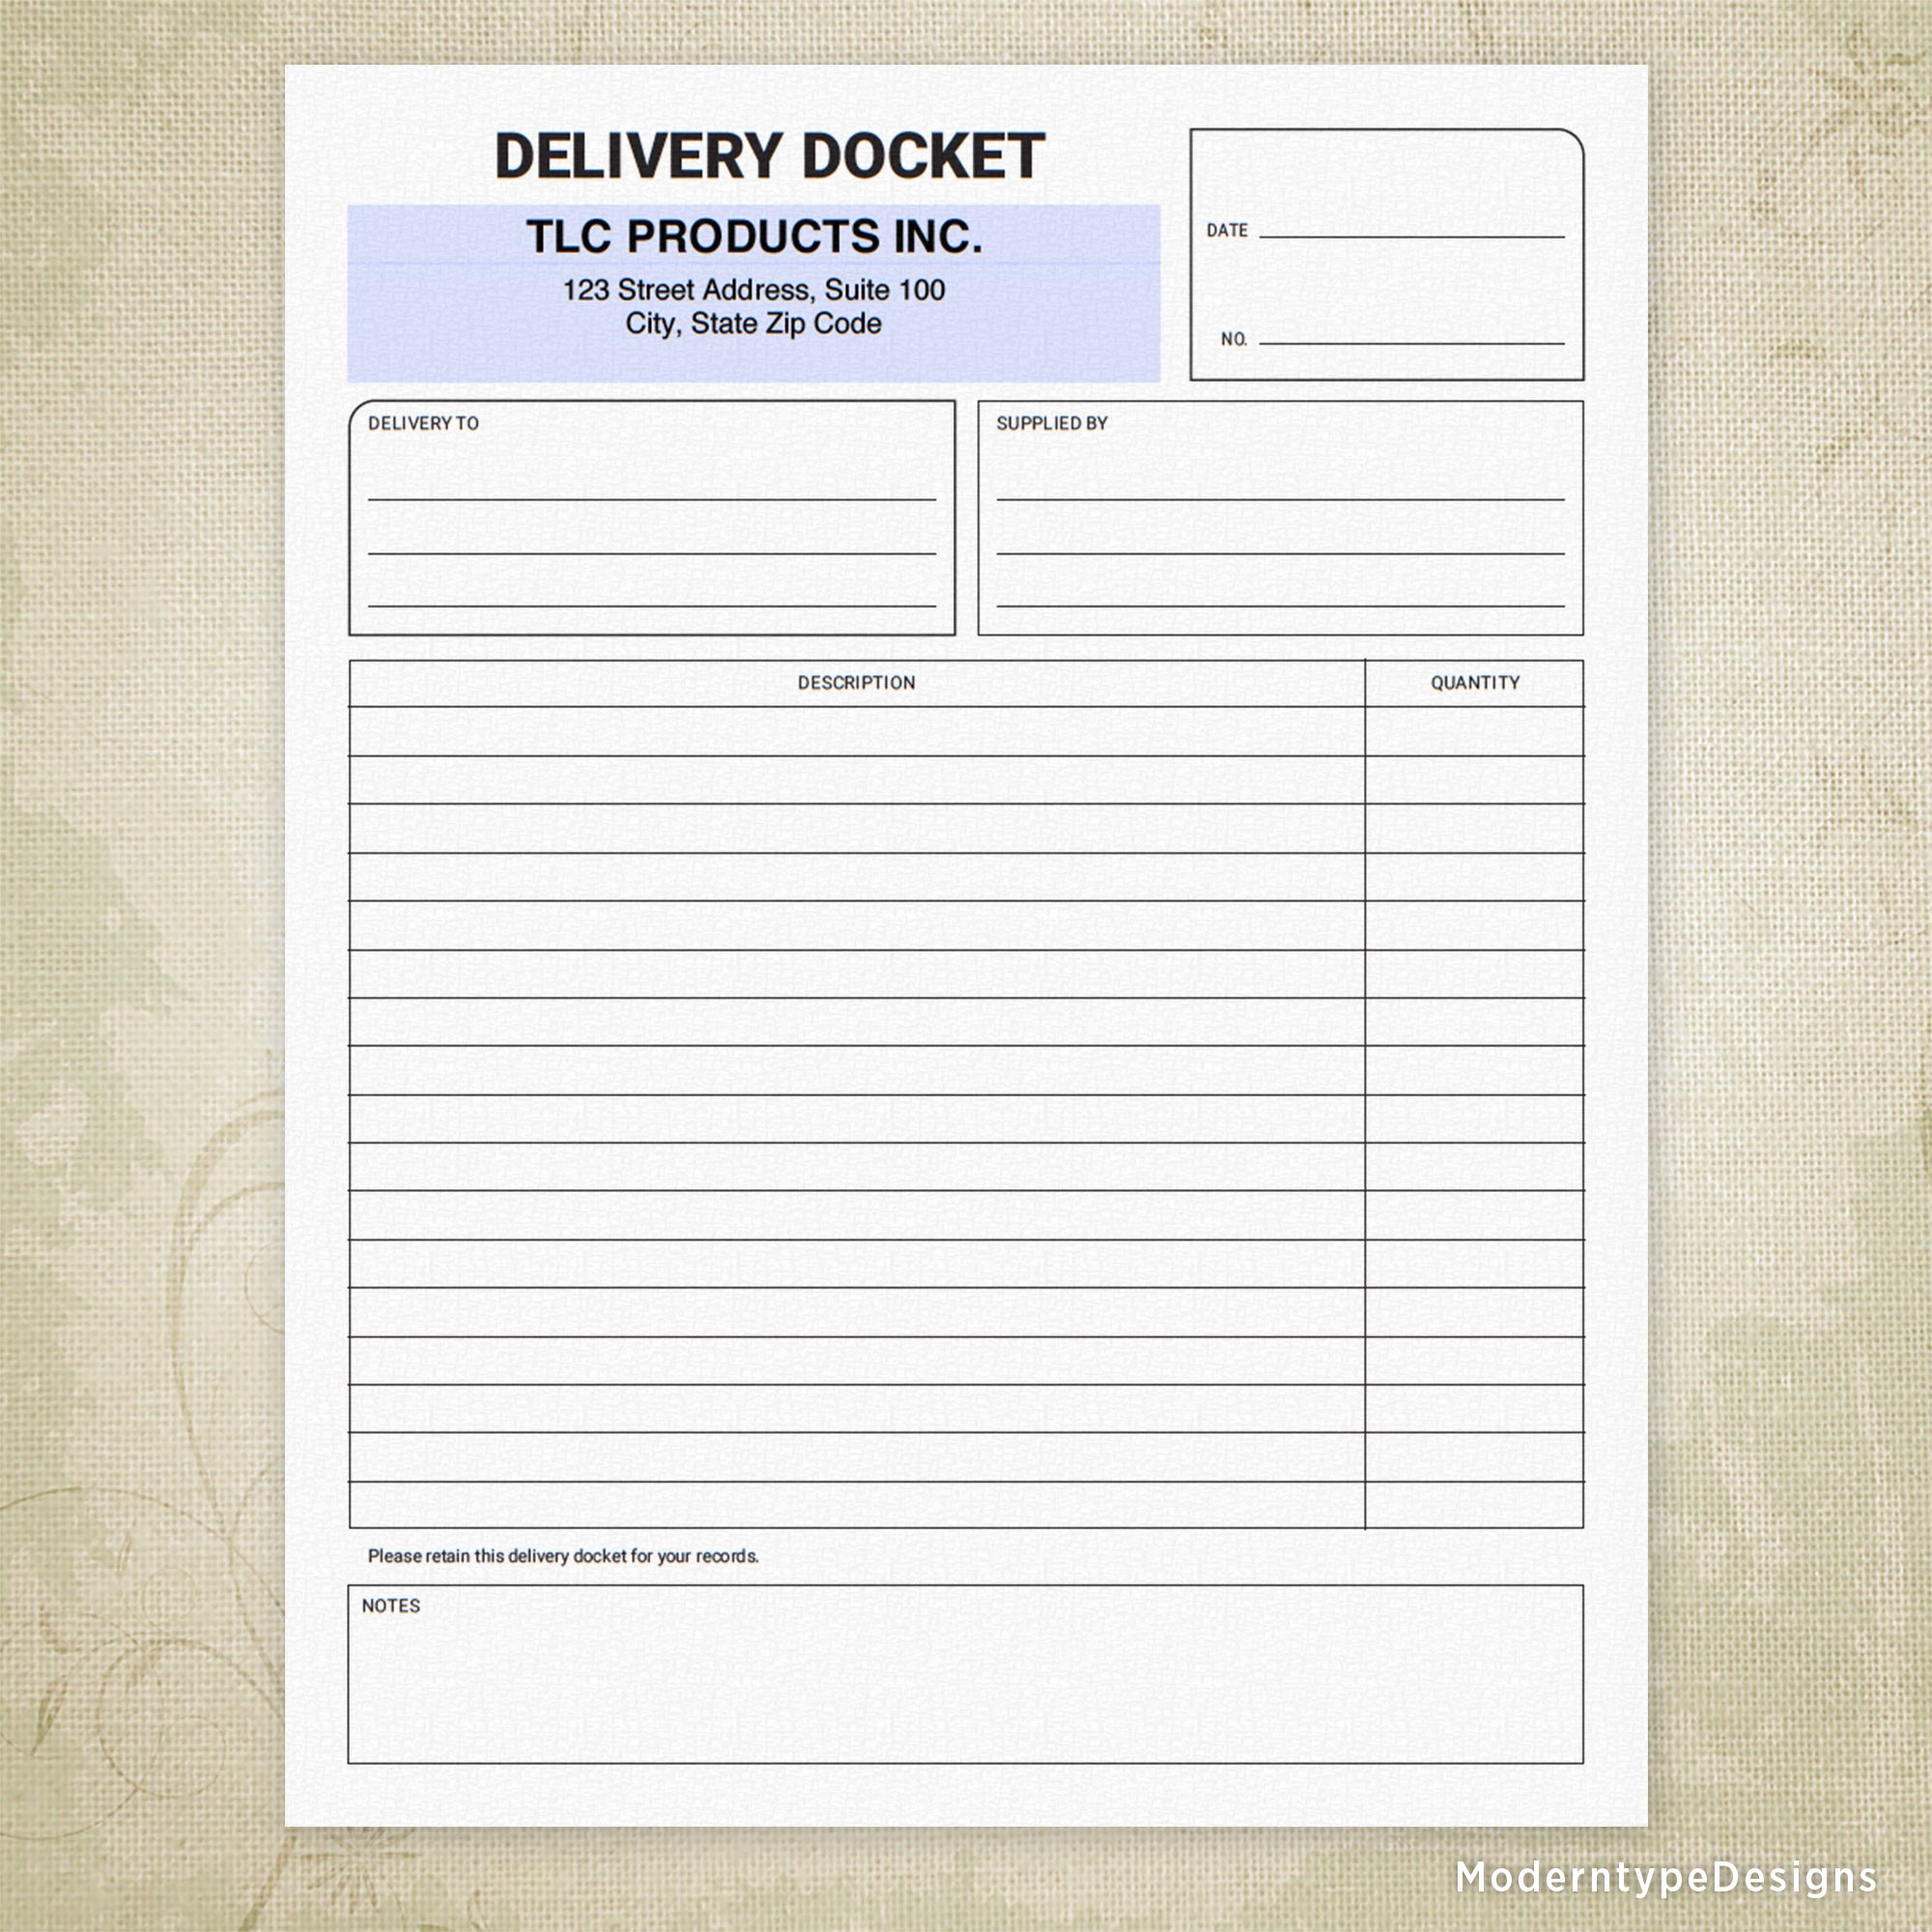 Delivery Docket Printable Form with Lines, Personalized, #1